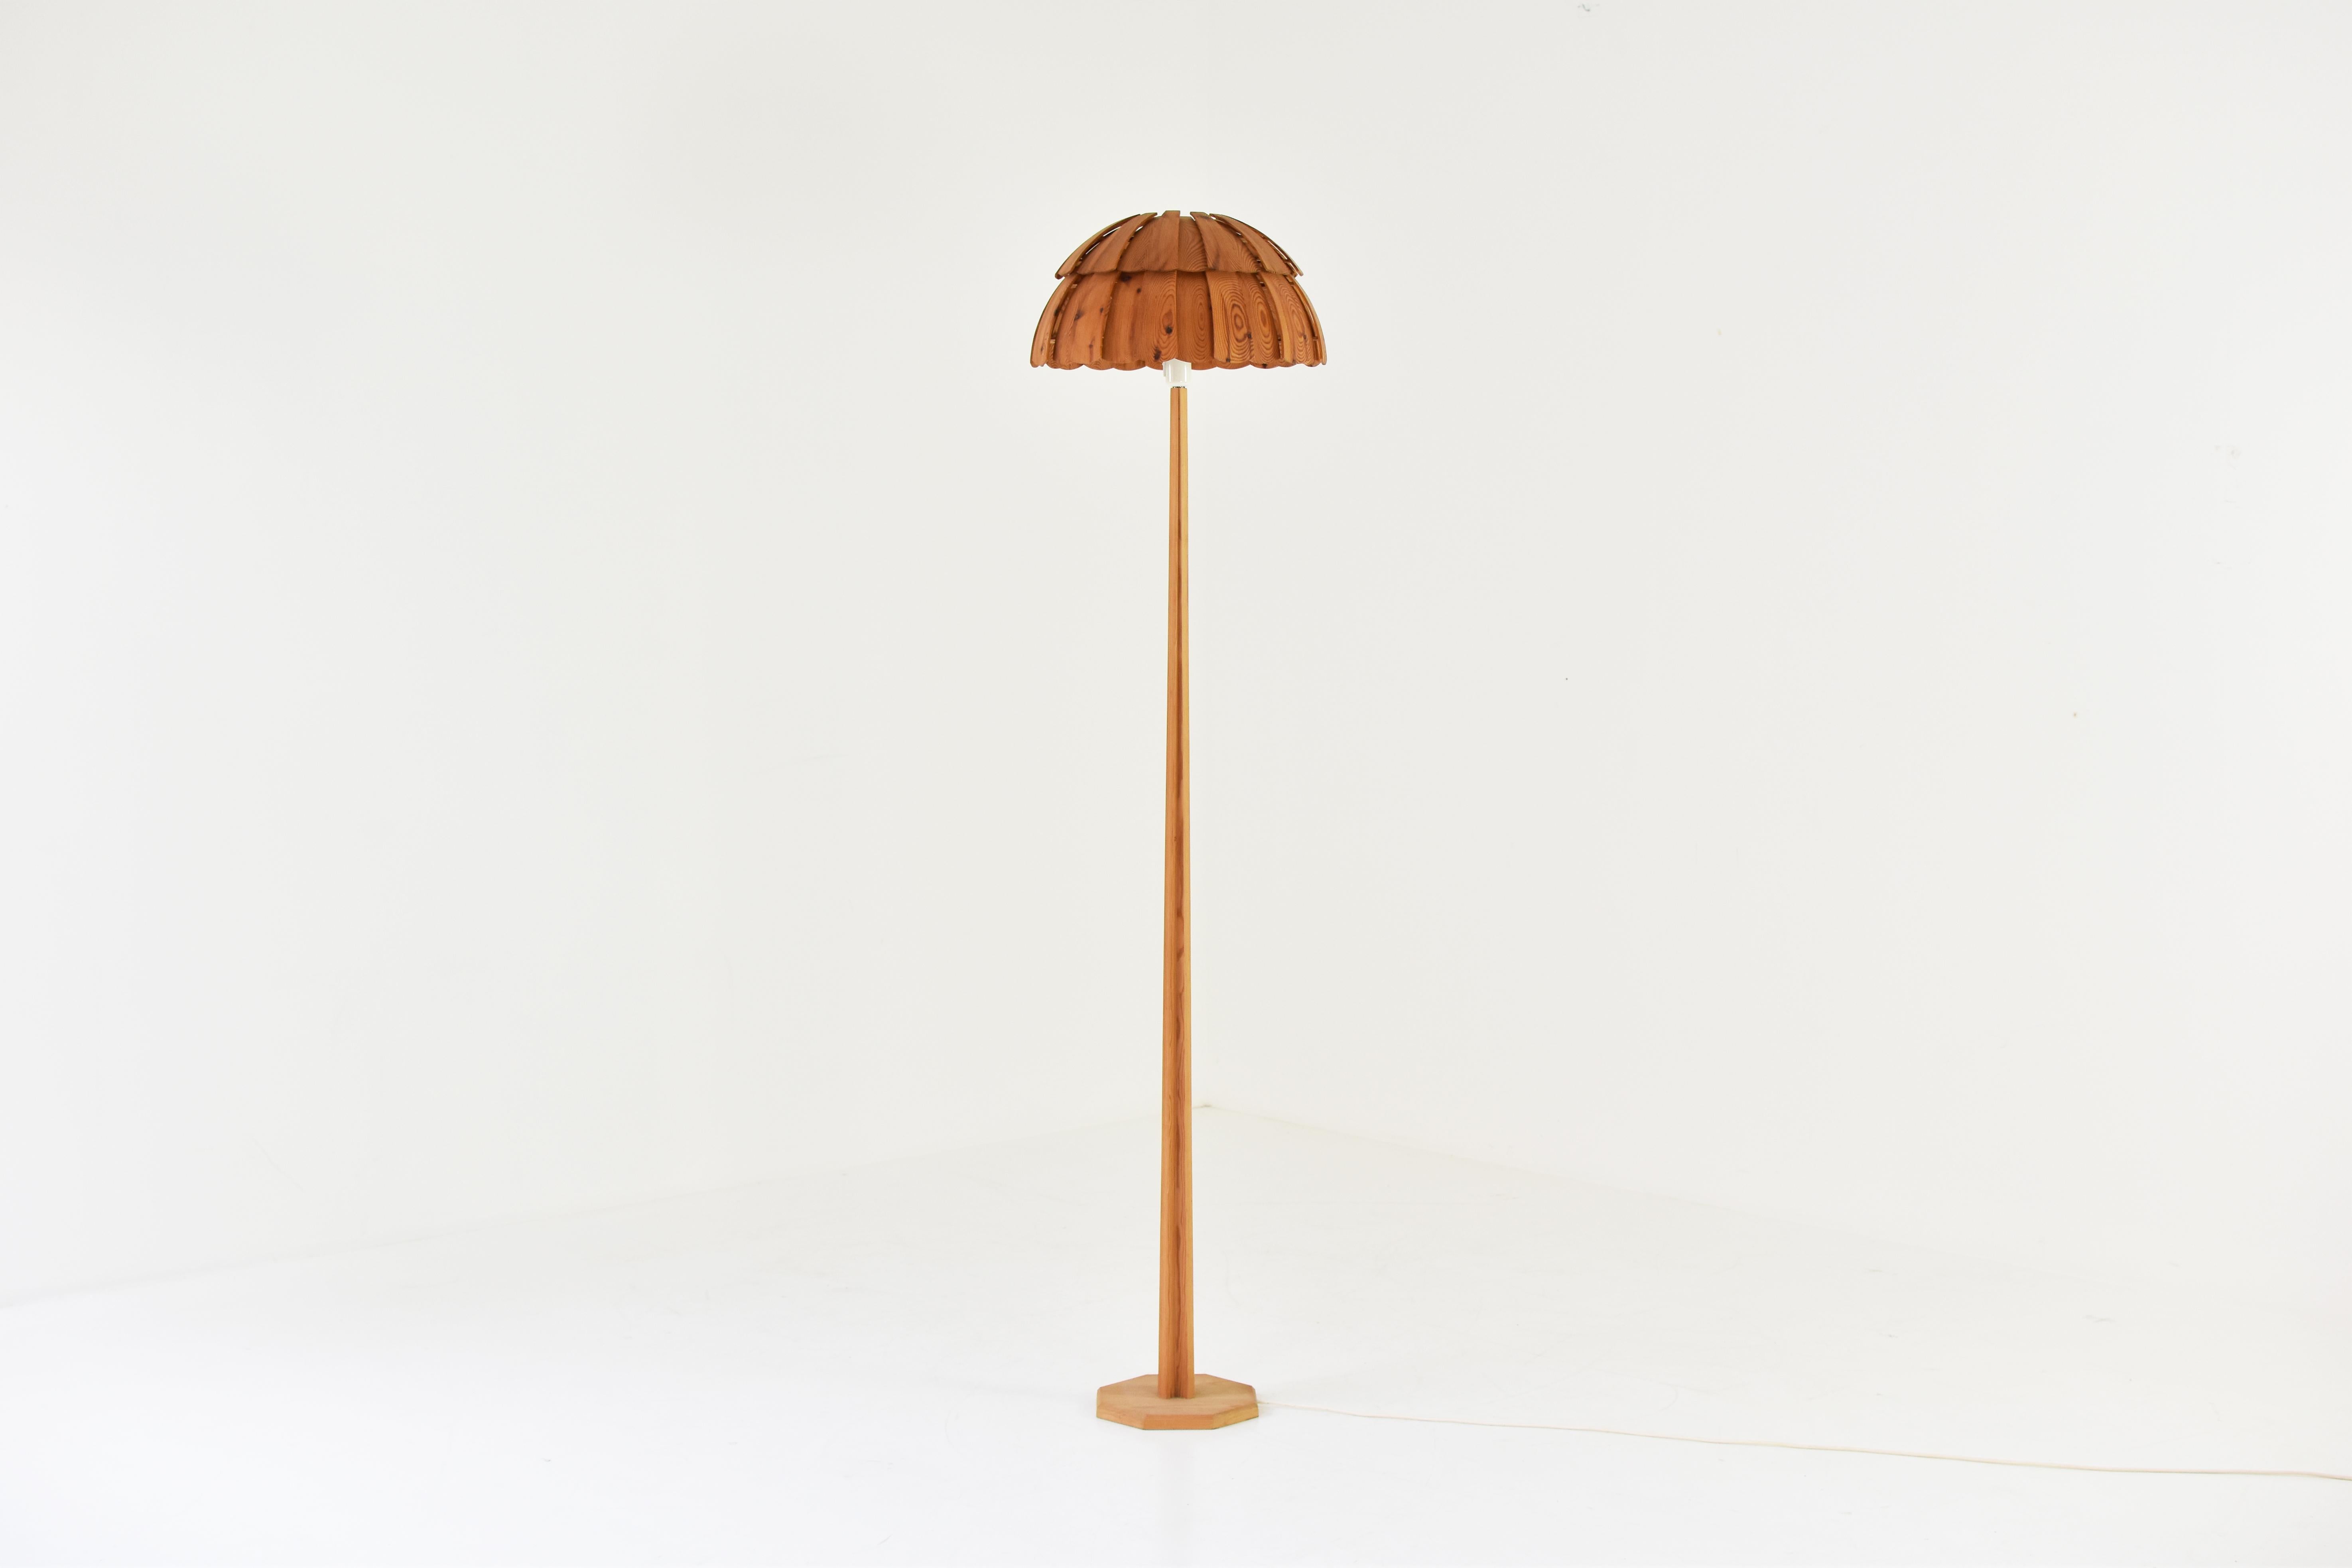 Tall organic ‘mushroom’ floor lamp in pine from Sweden, dating from the 1960s. This sculptural floor lamp is in a very well presented and original condition and has a great warm patina. Designer (for know) unknown.